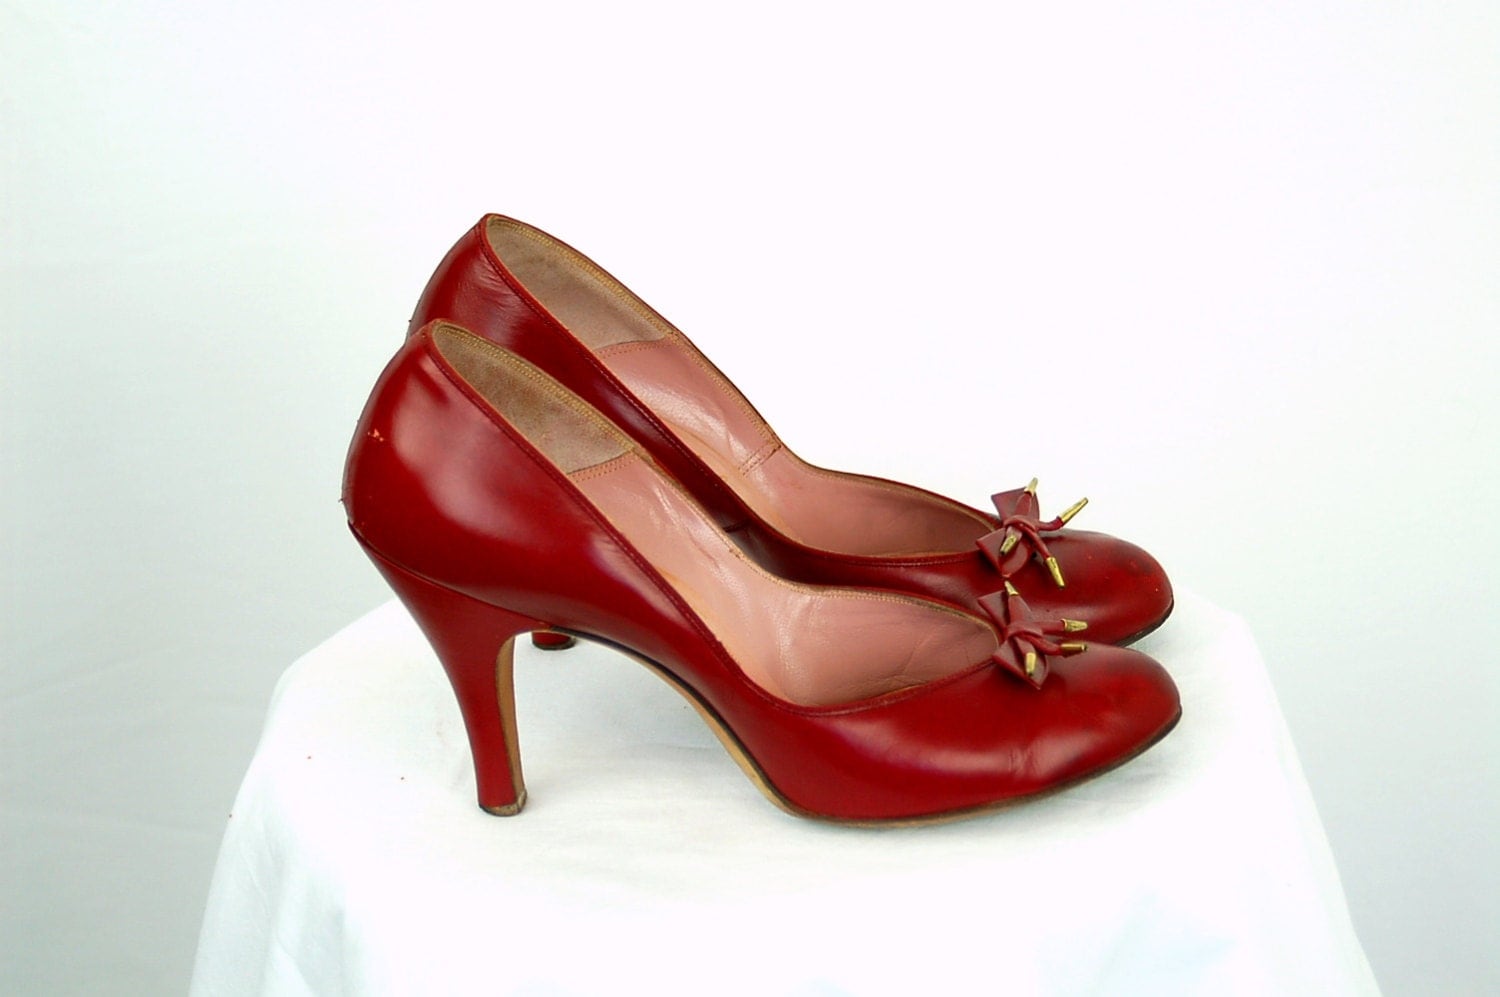 RESERVED 1940s shoes red heels Dalmanette 40s pumps Size